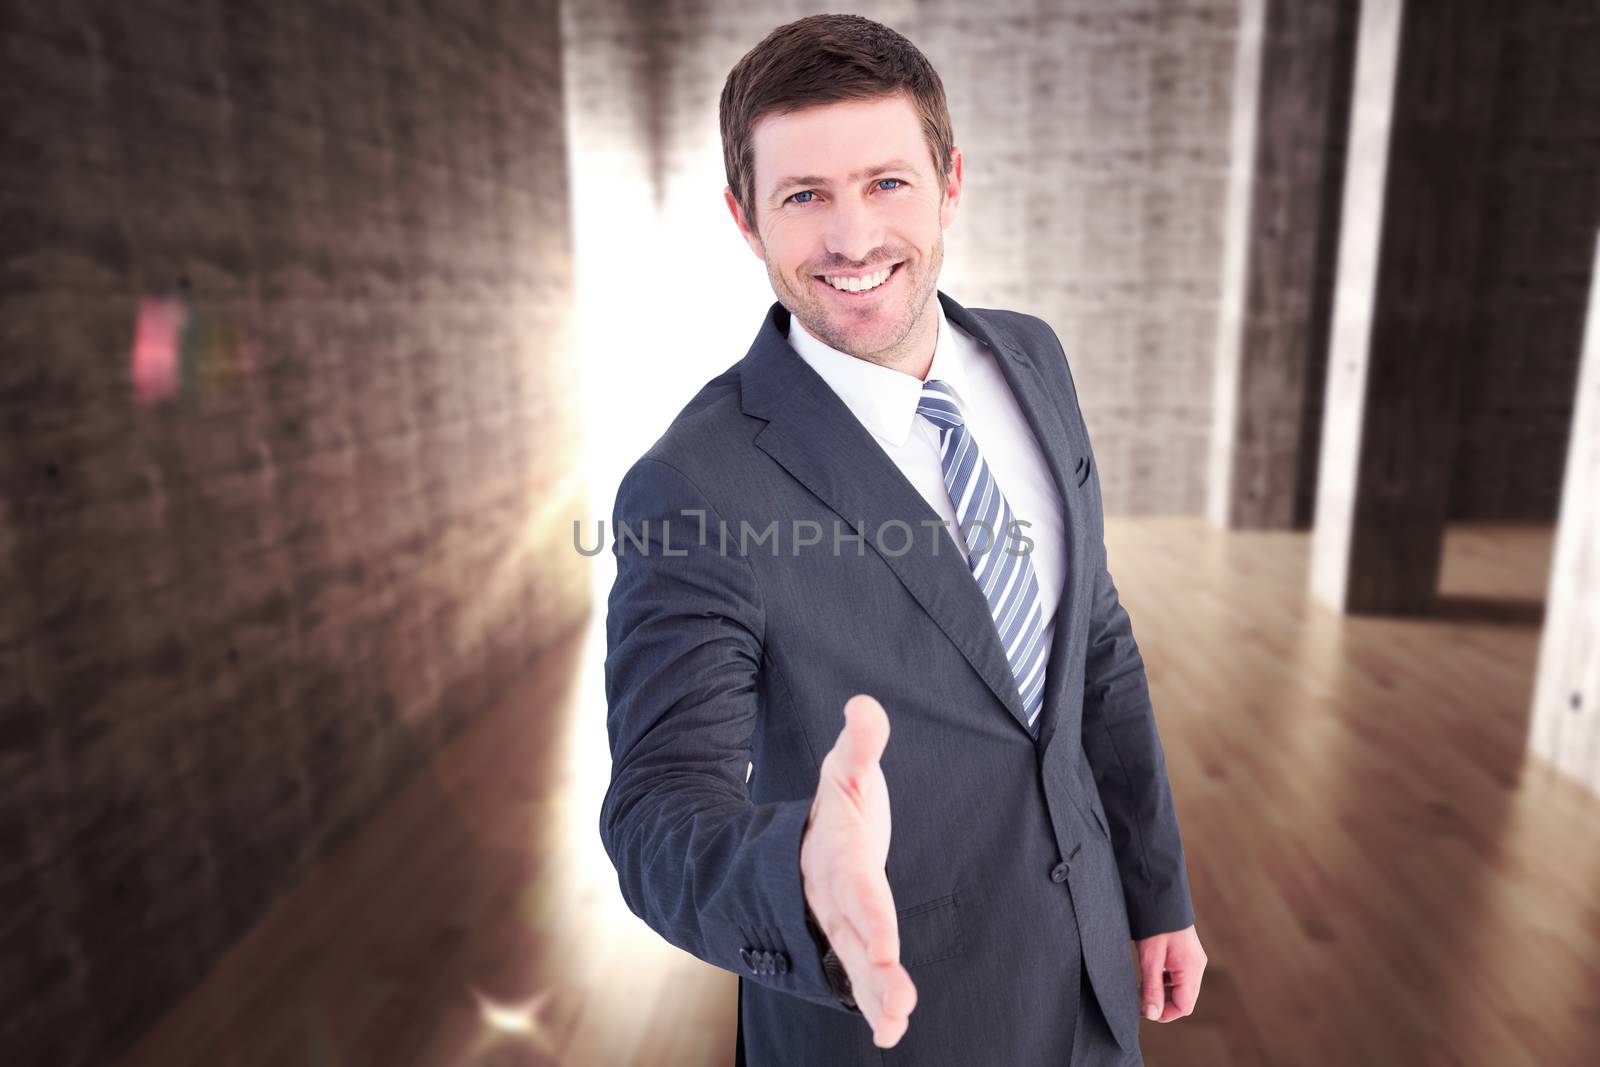 Composite image of businessman smiling and offering his hand by Wavebreakmedia